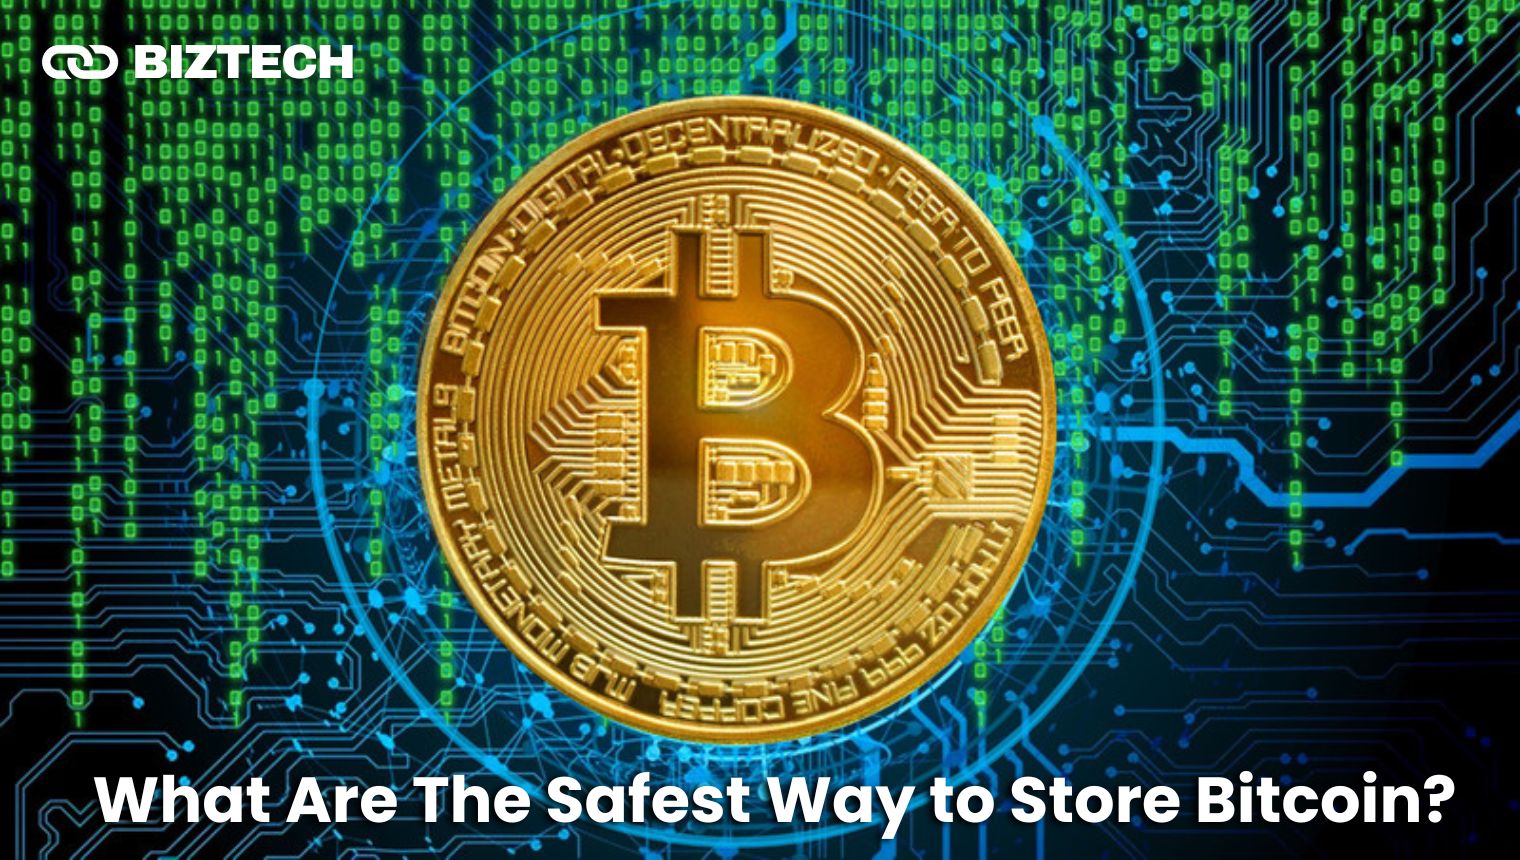 What Are the Safest Ways to Store Bitcoin?